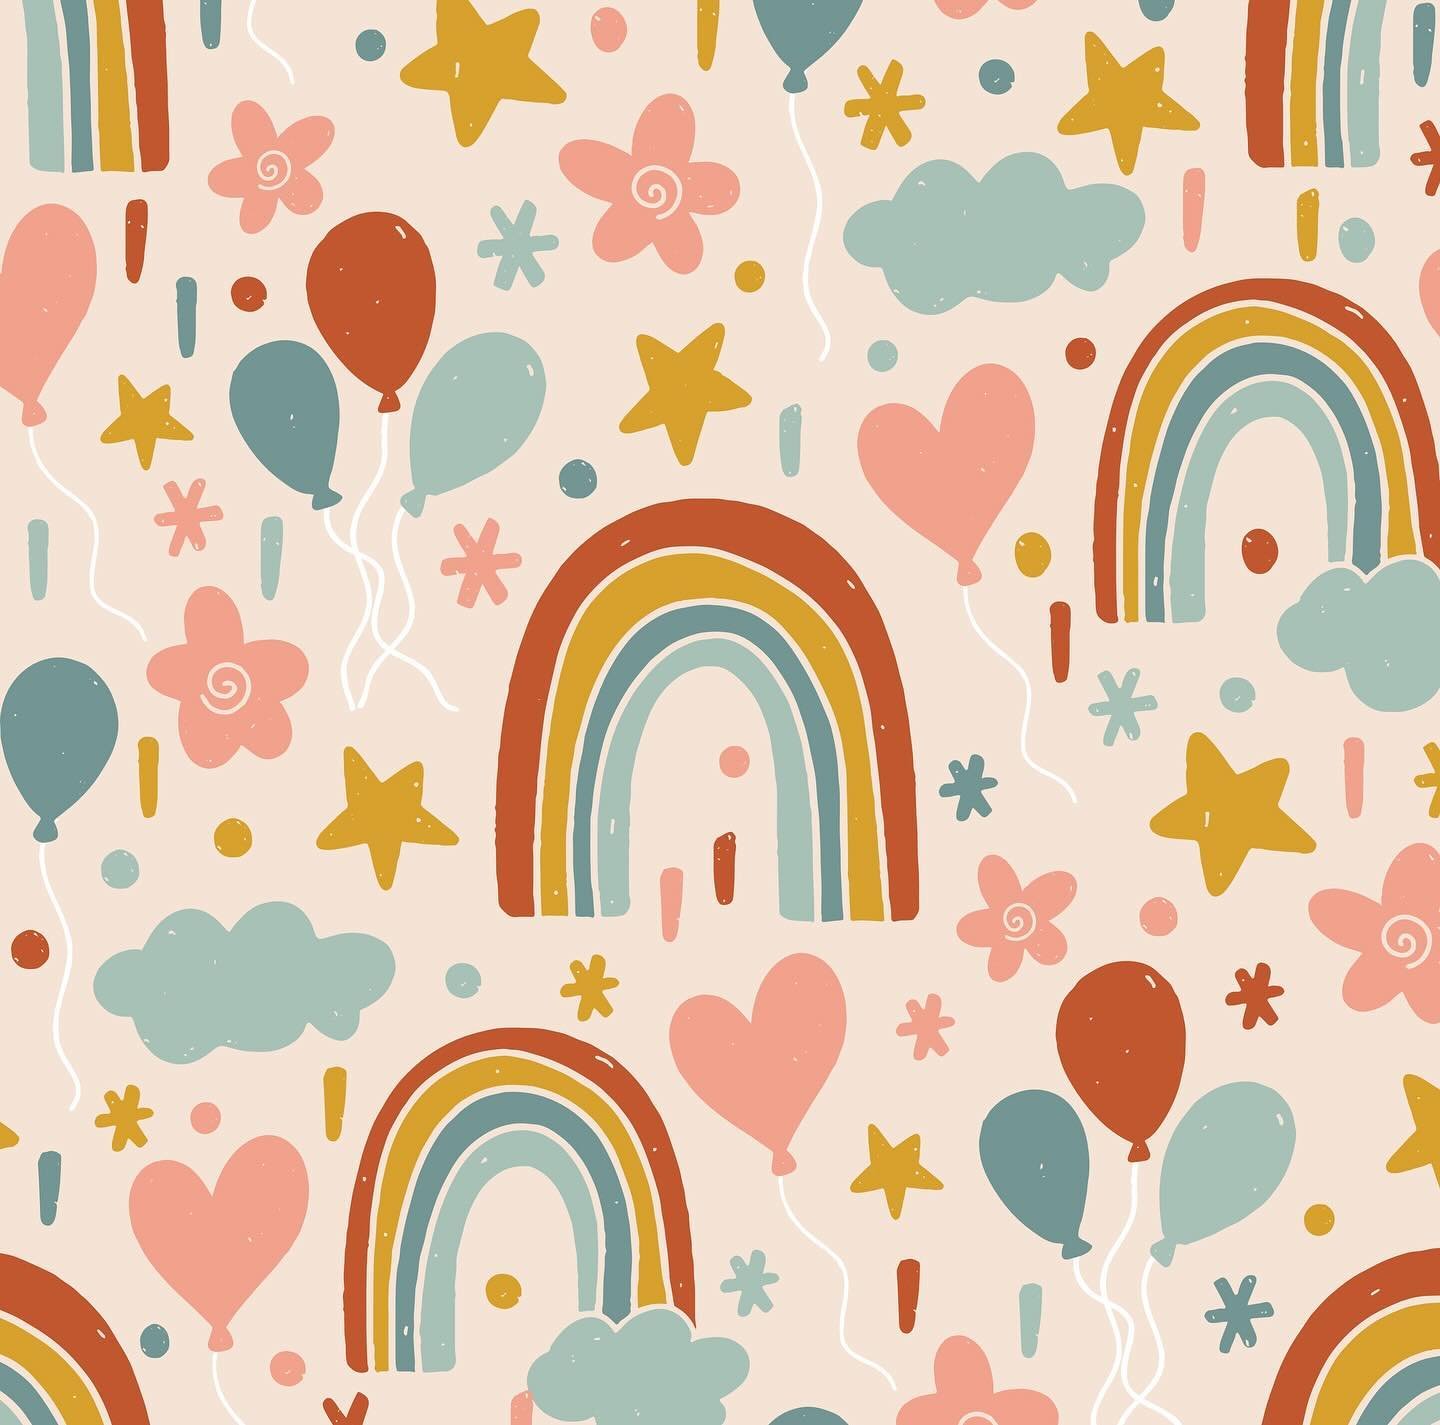 While it may be a little early to plan a first birthday party (Emily is only a month old after all) it&rsquo;s what popped into my head when designing for @spoonflower&rsquo;s Party Wall challenge! This print would also be great on partyware - and ho